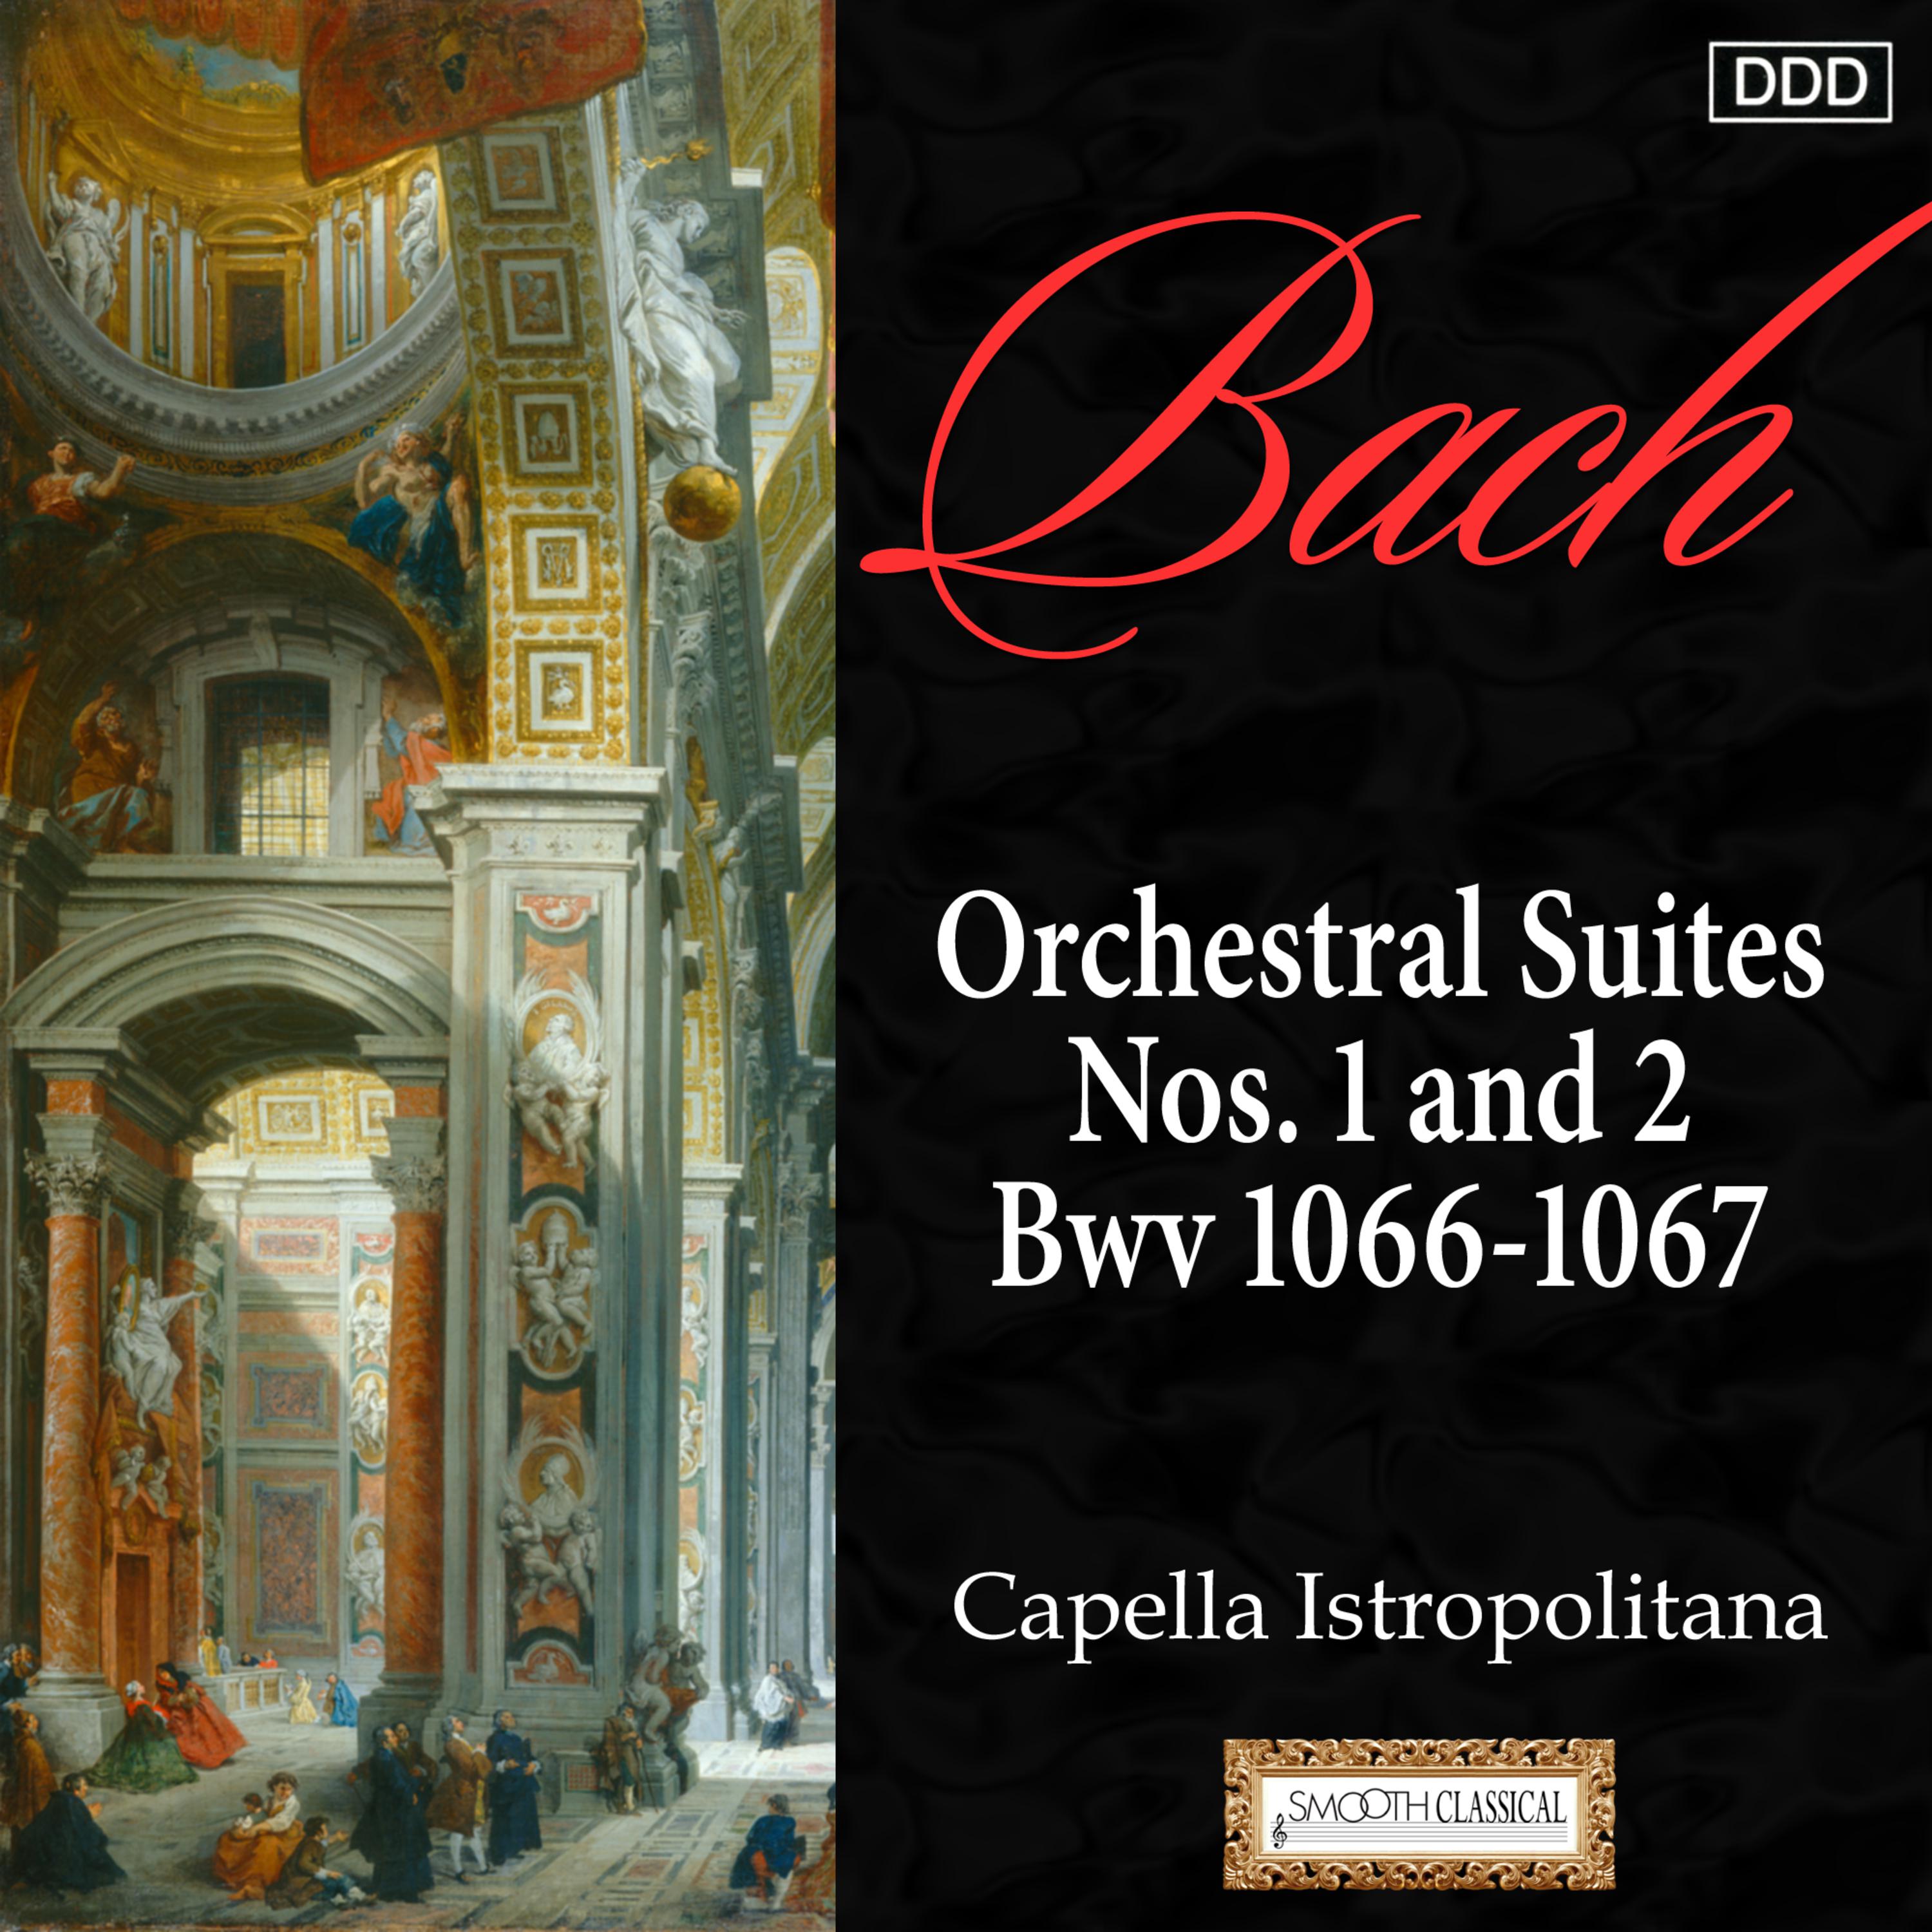 Orchestral Suite No. 1 in C Major, BWV 1066: III. Gavotte I and II